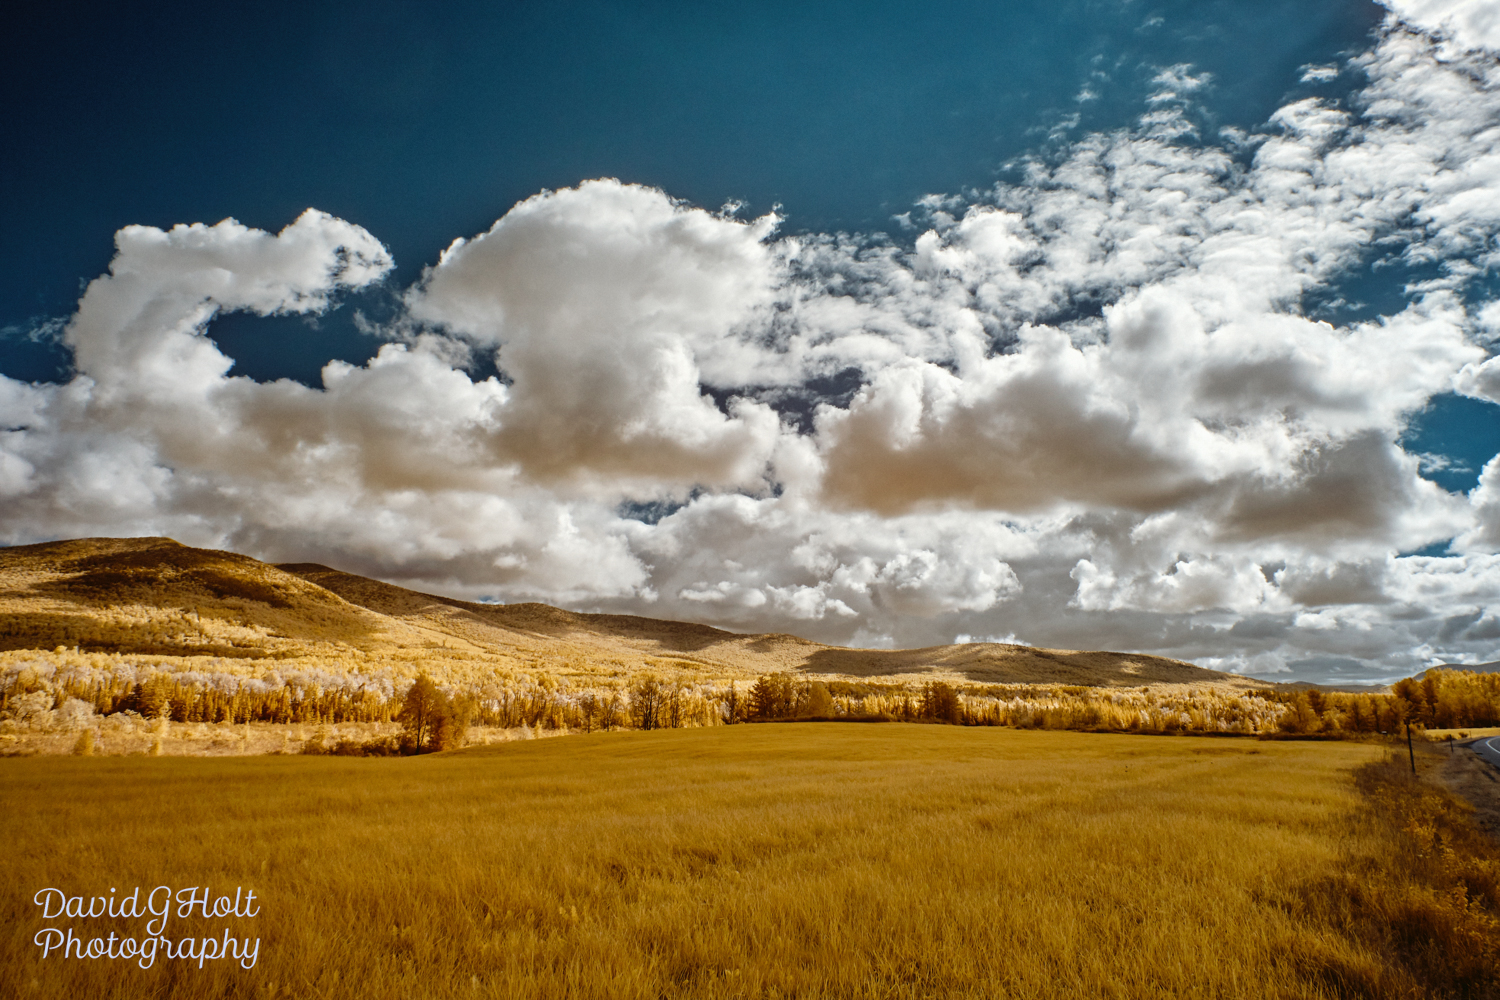 Clouds Over the White Mountains in Infrared Scenic Fine Art Print Wall Art